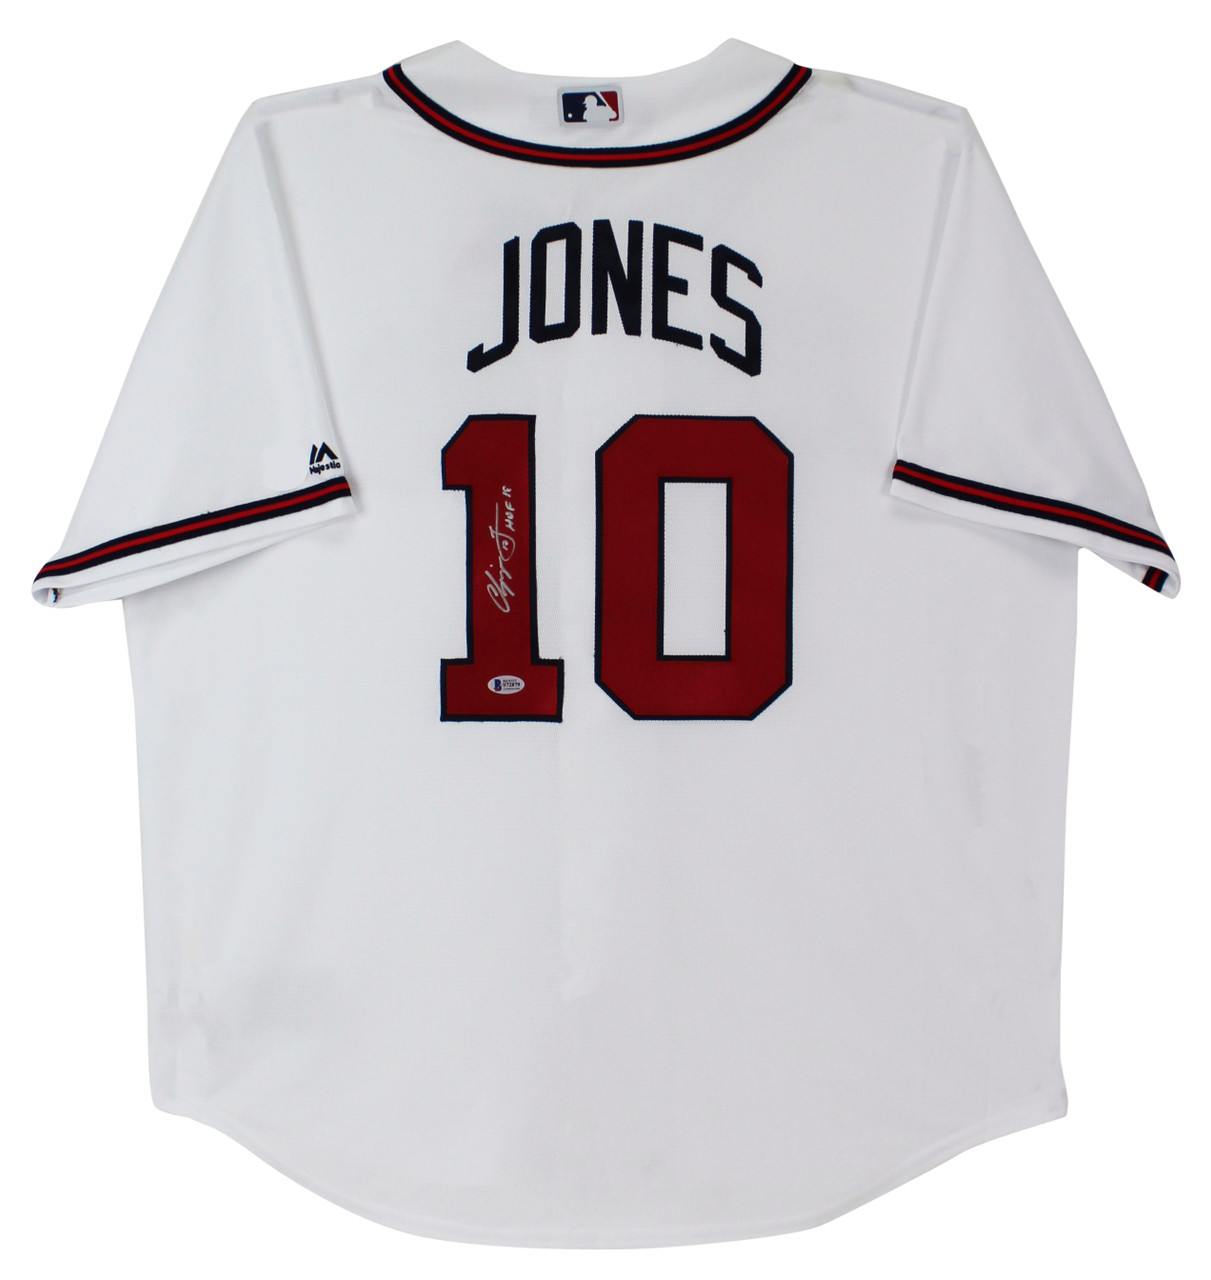 Chipper Jones Autographed and Framed White Braves Jersey